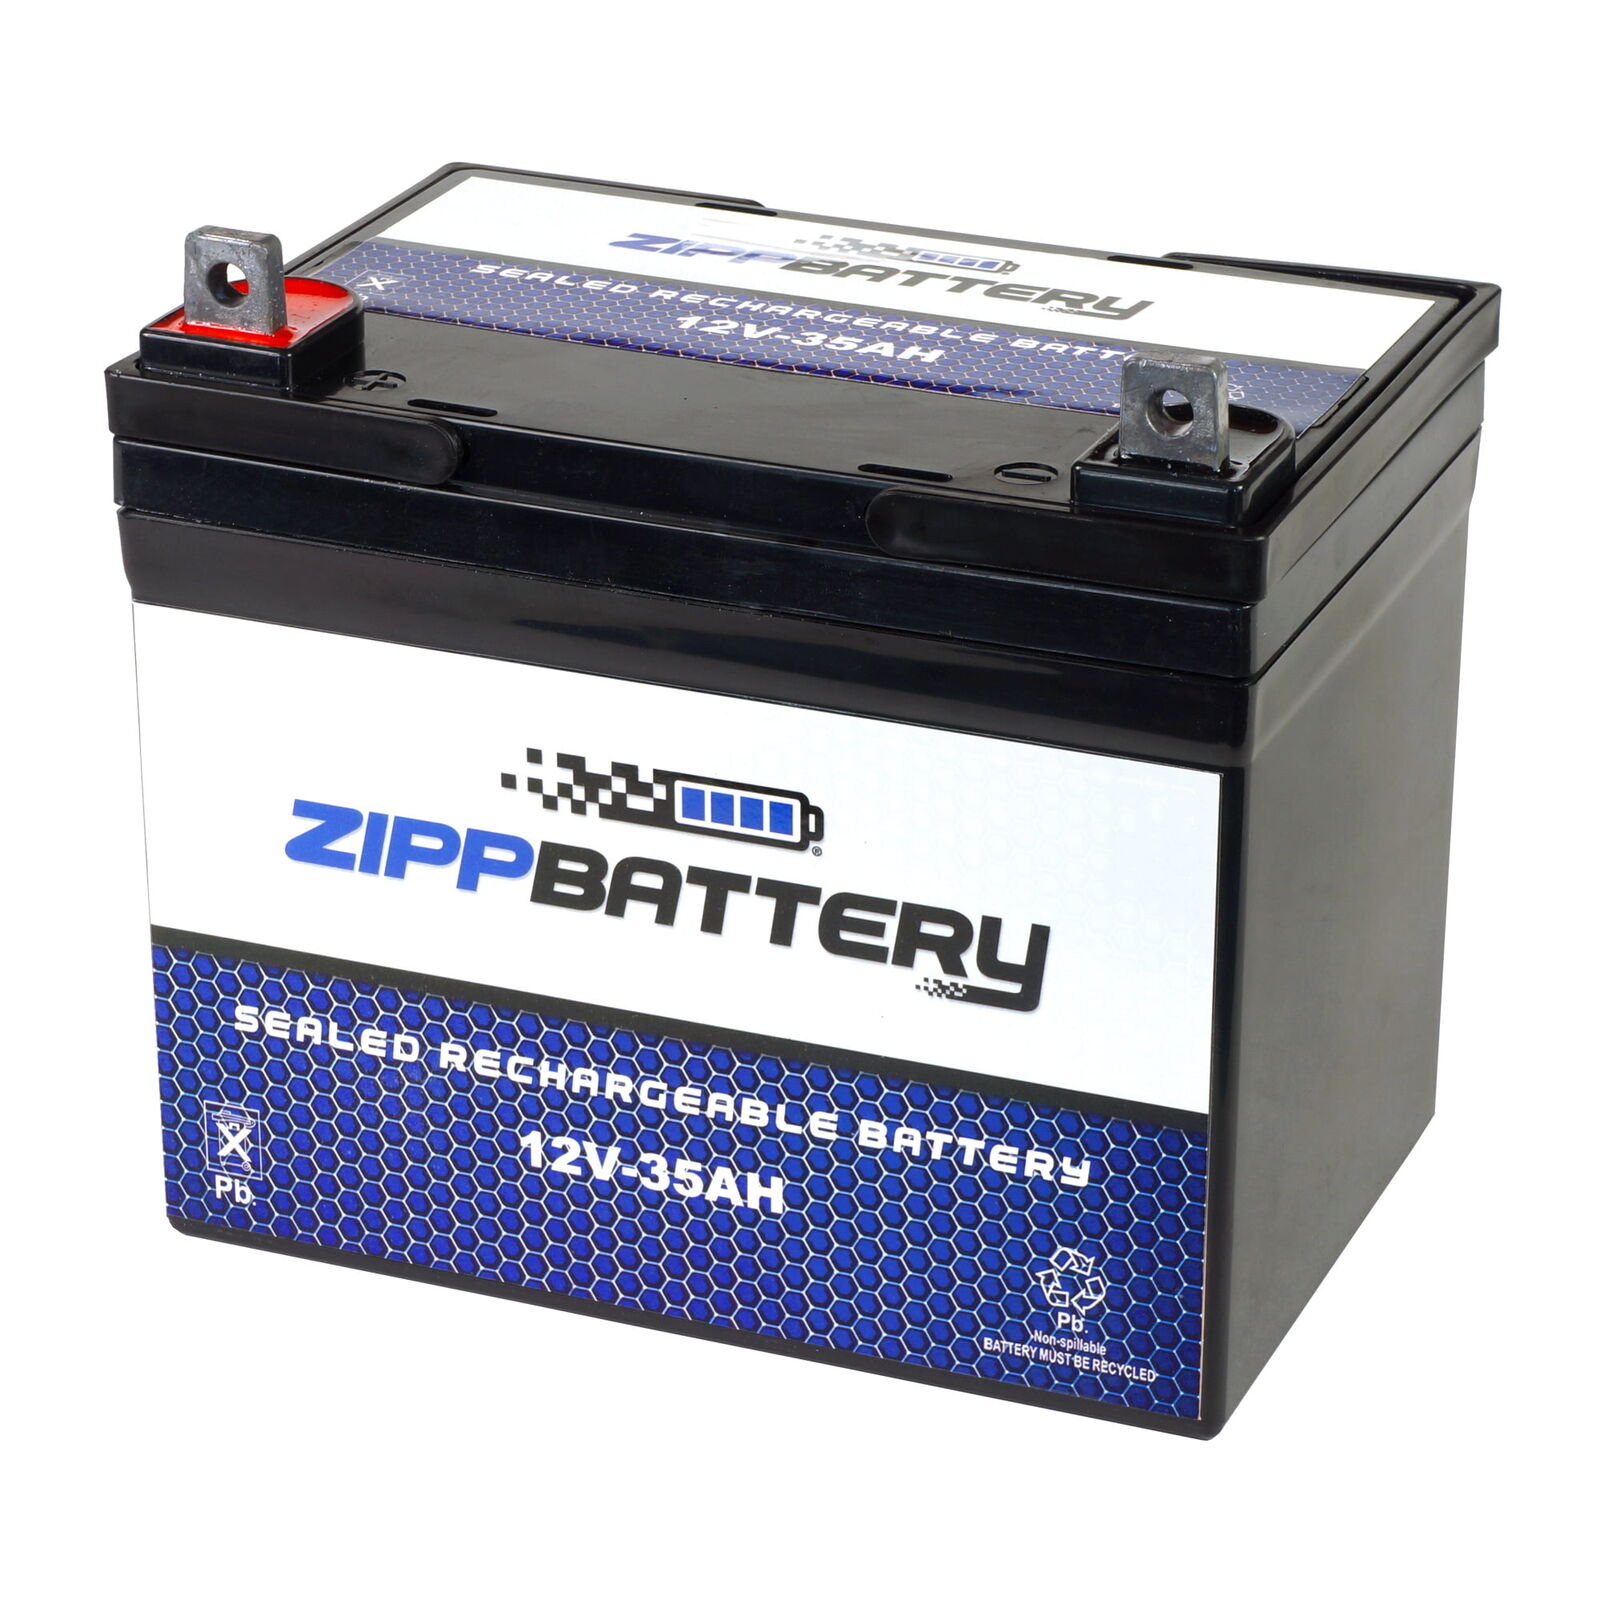 NEW 12V 35Ah U1 Sla Agm Battery Scooter Wheelchair Replaces Ub12350 Agm1234T.